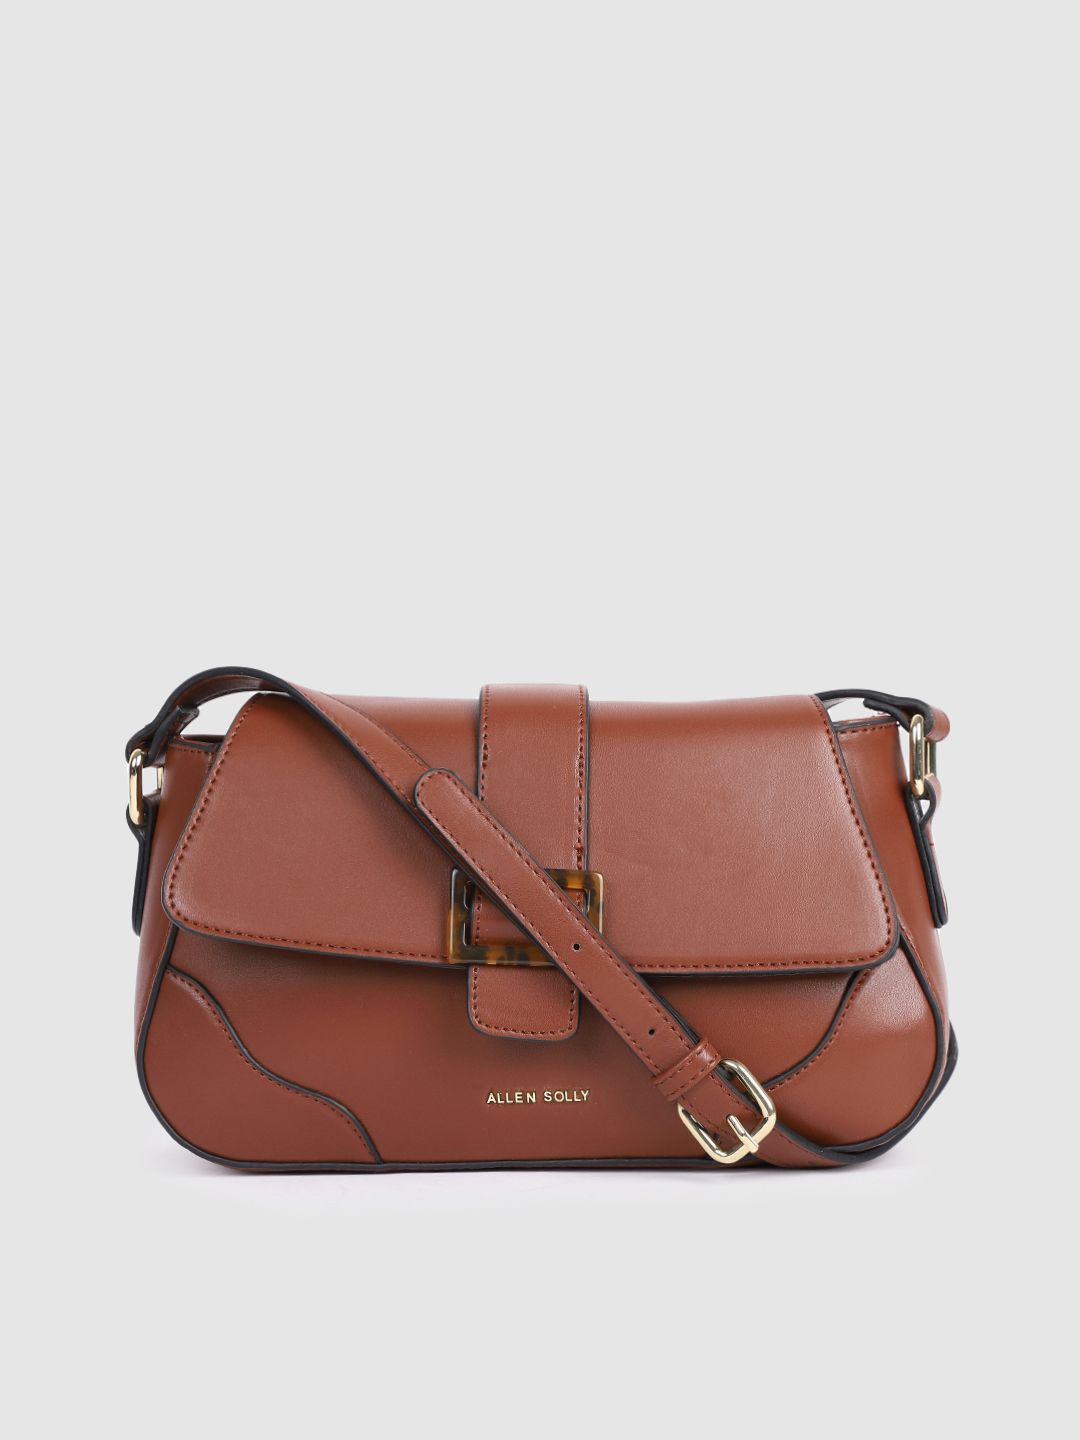 Allen Solly Brown PU Structured Sling Bag Price in India